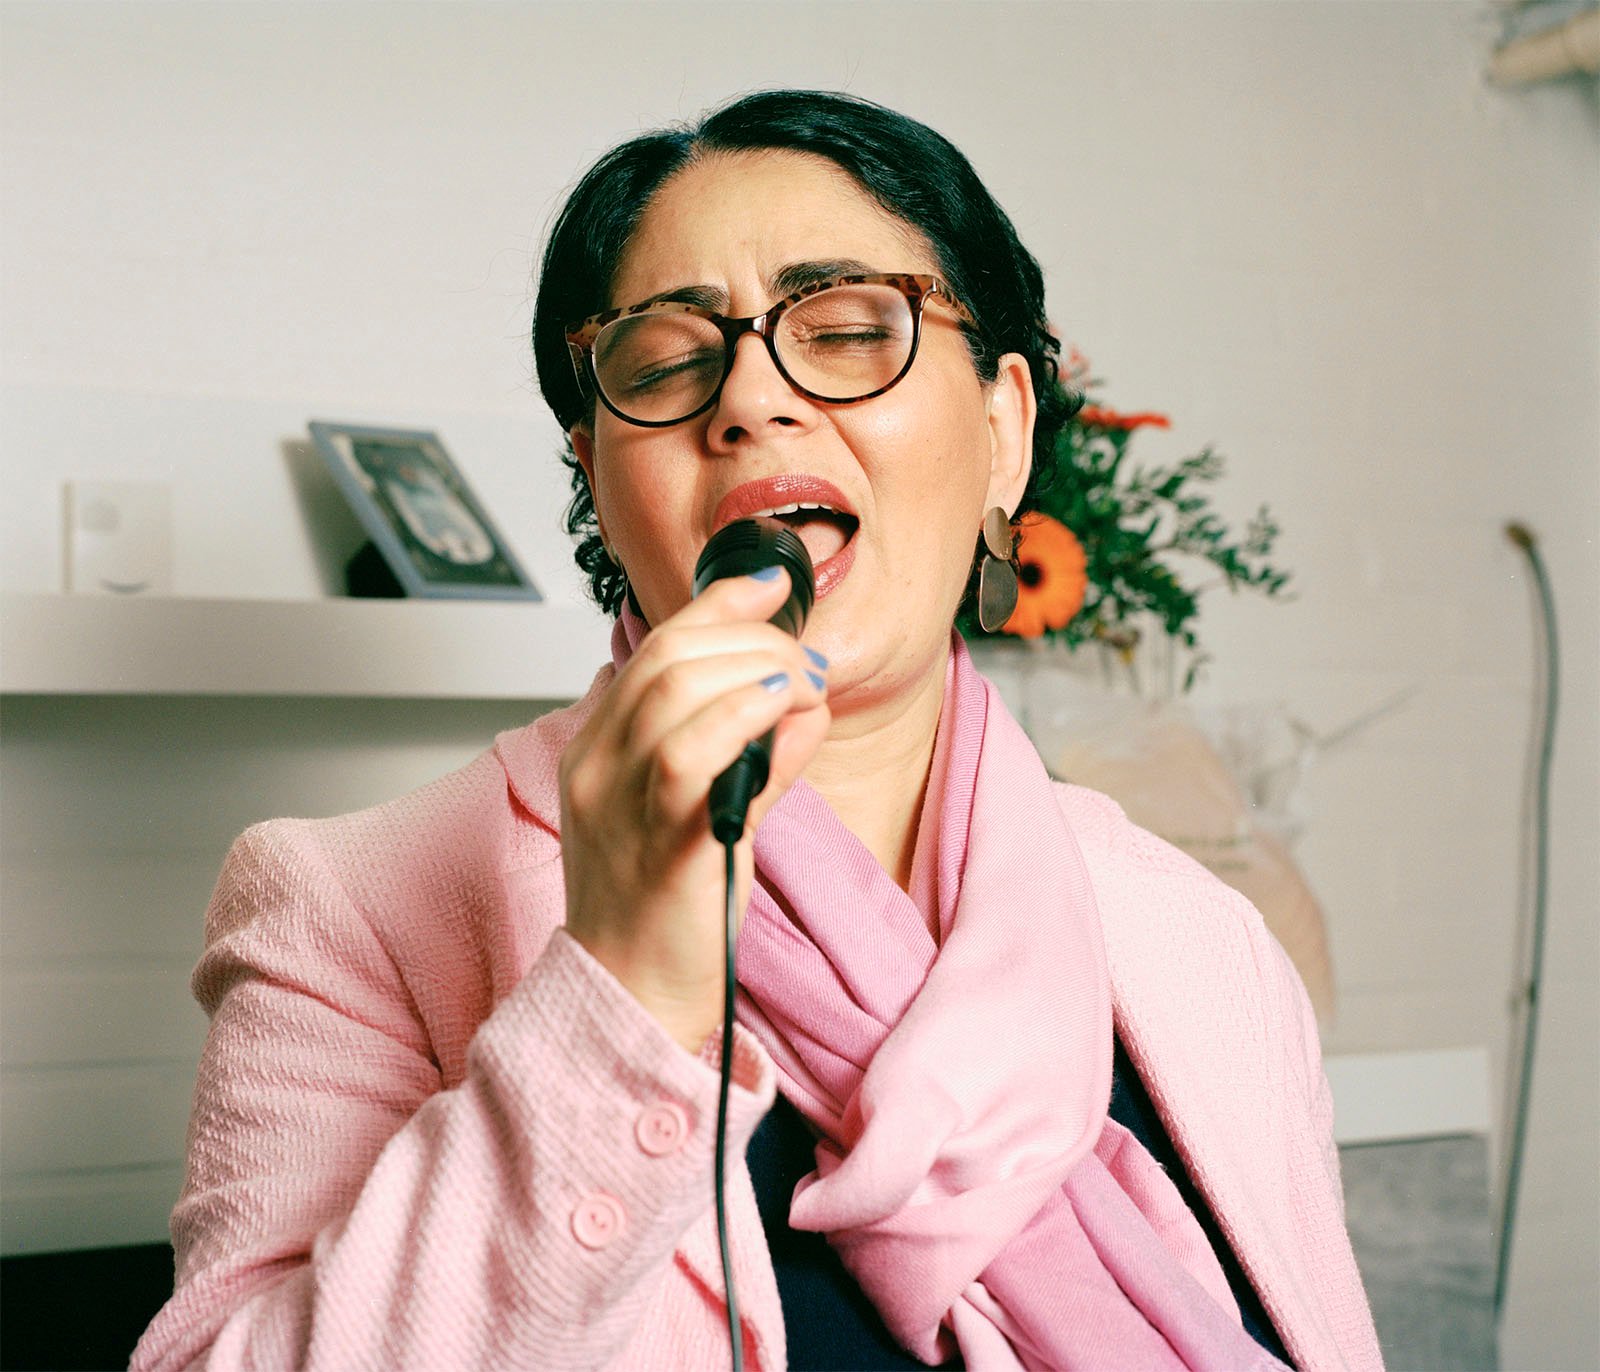 A woman wearing glasses and a pink blazer sings passionately into a microphone, eyes closed, in a room with a white wall and subtle decor.